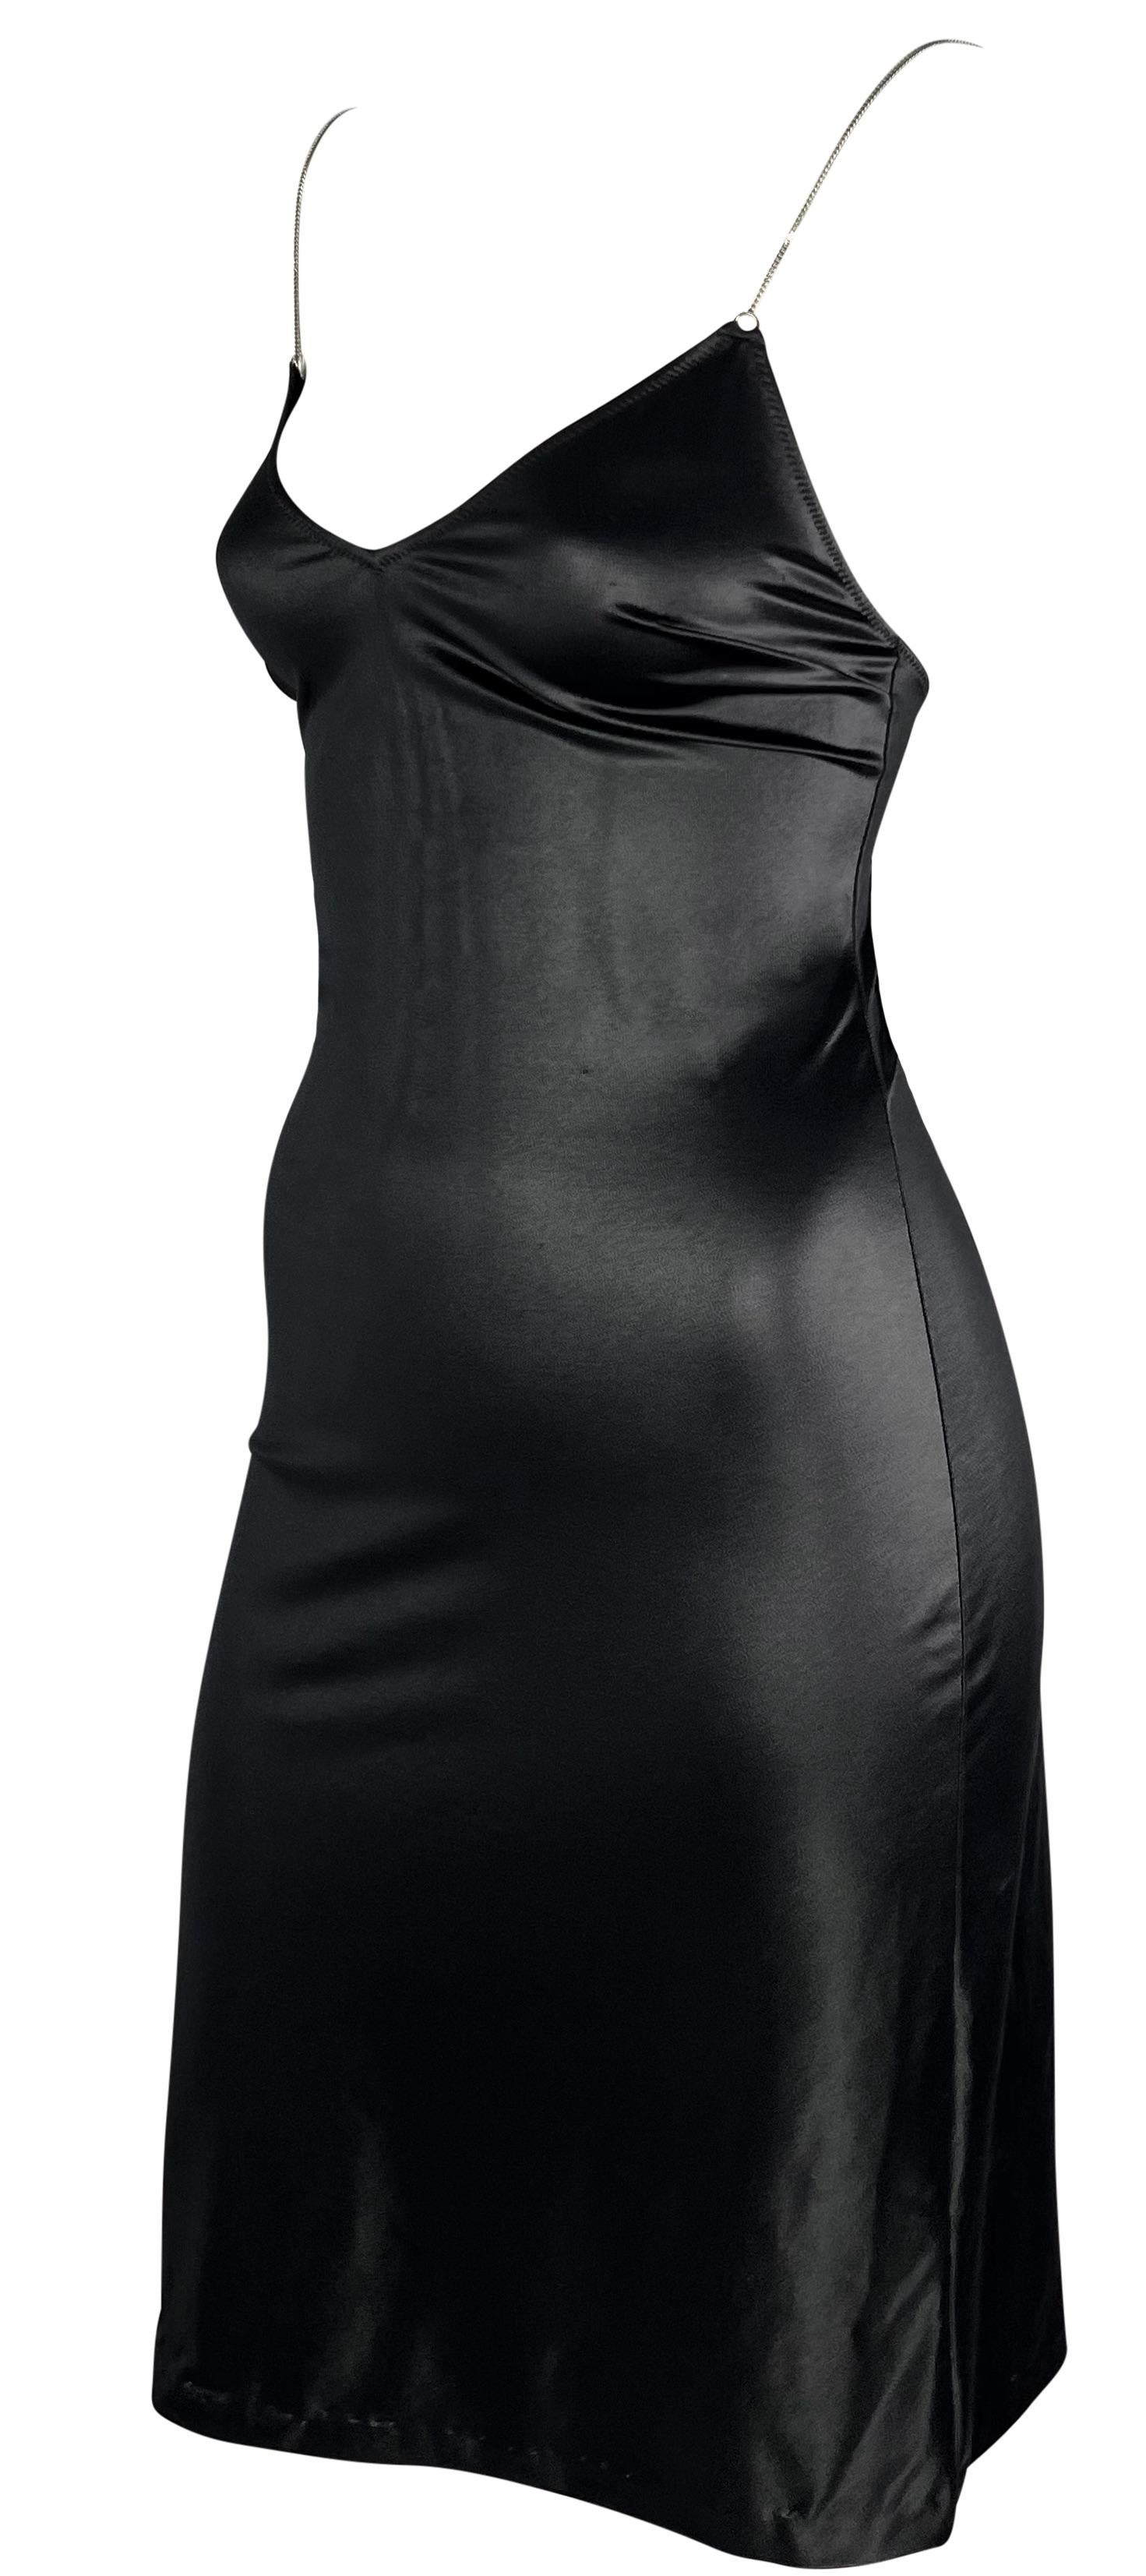 This shiny black Dolce & Gabbana mini dress perfectly clings to the body. This wet look slip-style dress from the 1990s features a low neckline and back. The dress is made complete with thin silver-tone chain straps. 

Approximate measurements:
Size